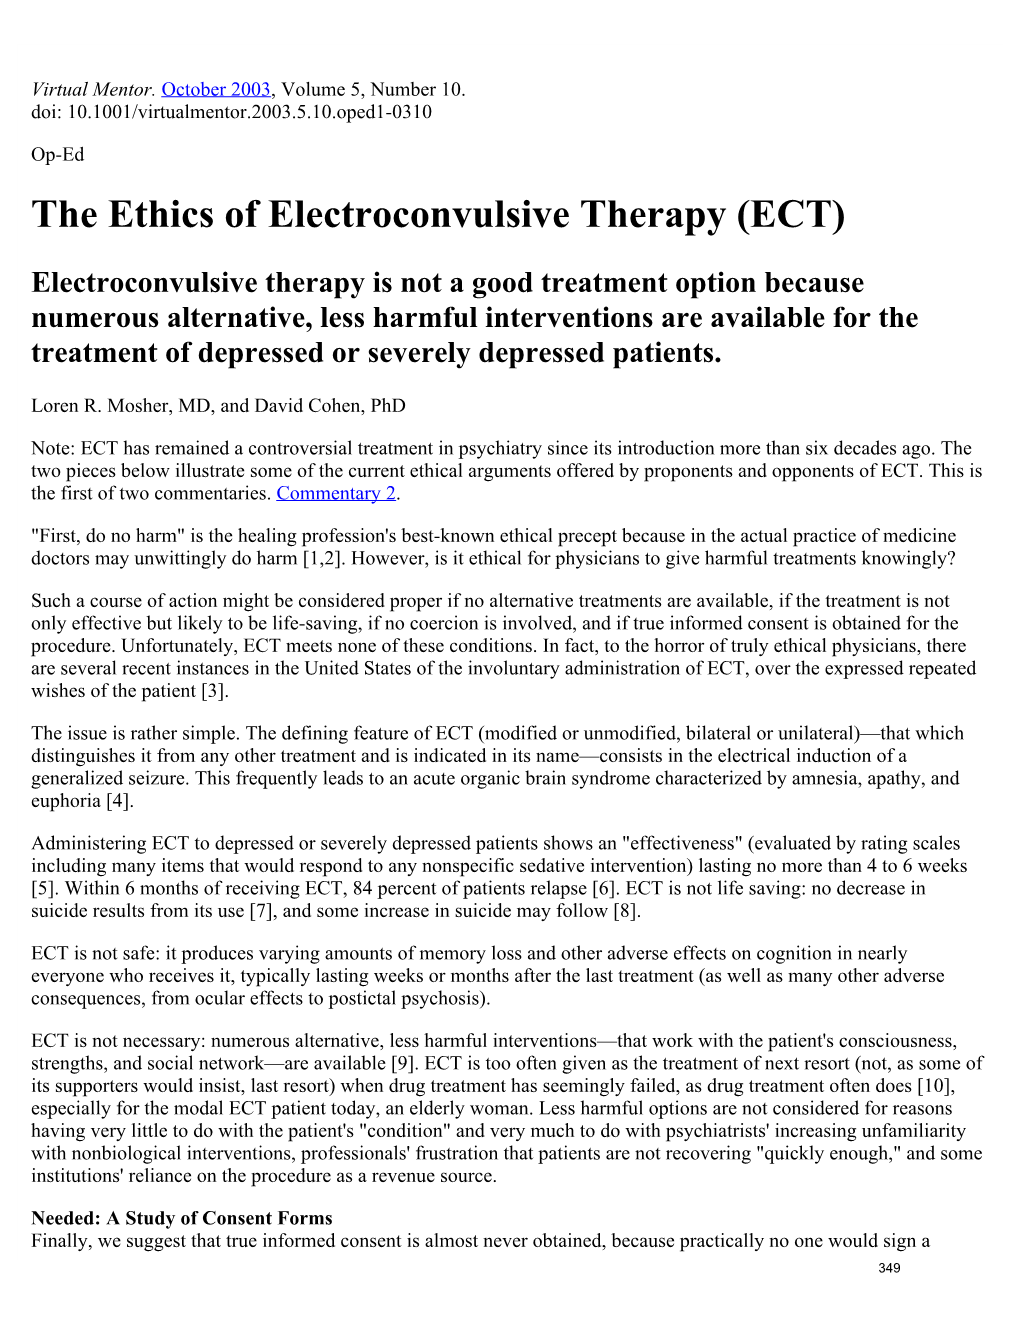 The Ethics of Electroconvulsive Therapy (ECT)